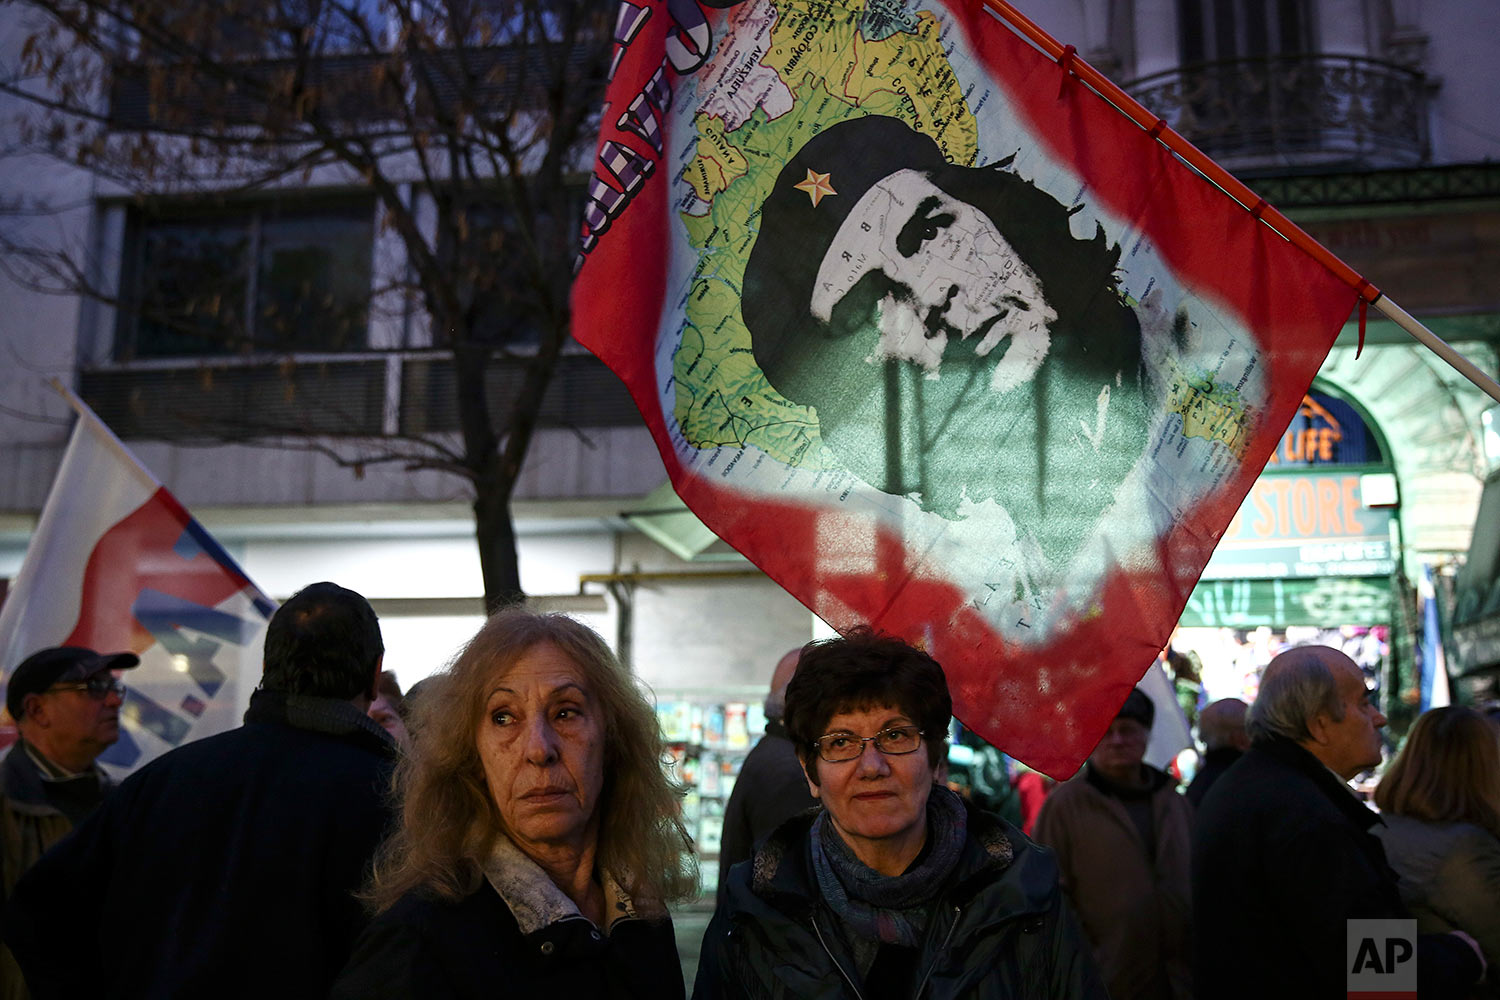  Supporters of the communist-affiliated union PAME stand beneath a flag depicting Cuban revolutionary leader Che Guevara during an anti-austerity rally in Athens, Tuesday, Feb. 21, 2017. (AP Photo/Yorgos Karahalis) 